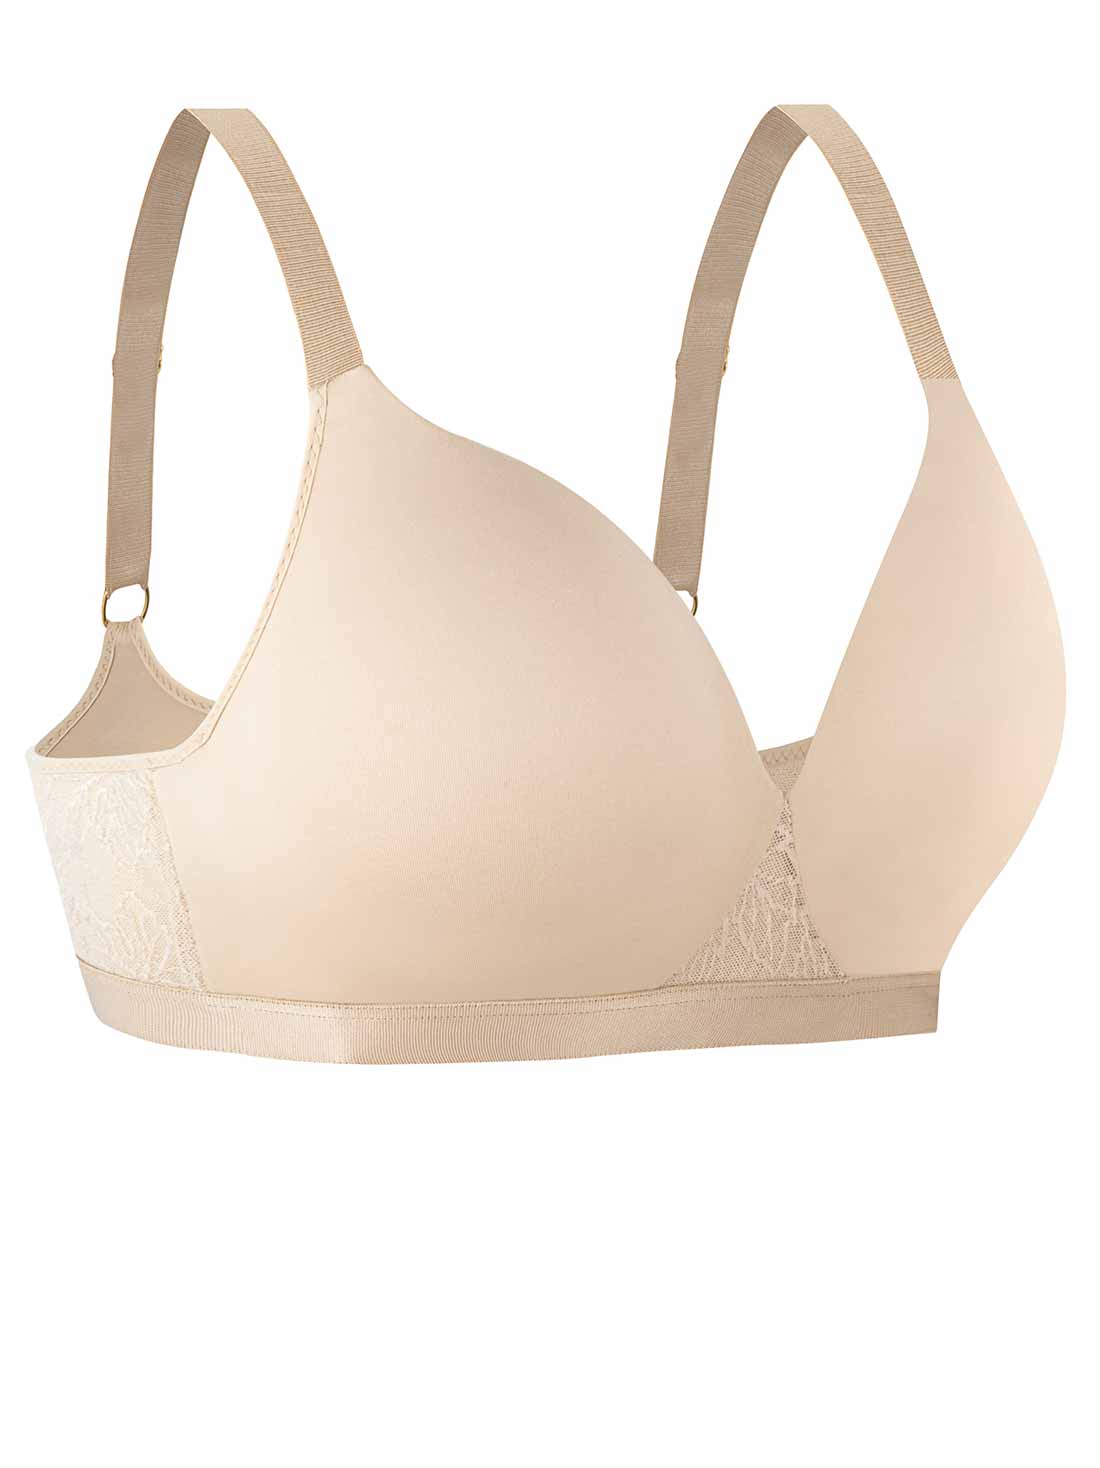 Riza Intimates on Instagram: Experience unparalleled comfort and  confidence with Riza Minimizer. With its high breast coverage and smooth  inner fabric, it's designed to provide a cushiony feel against your skin and